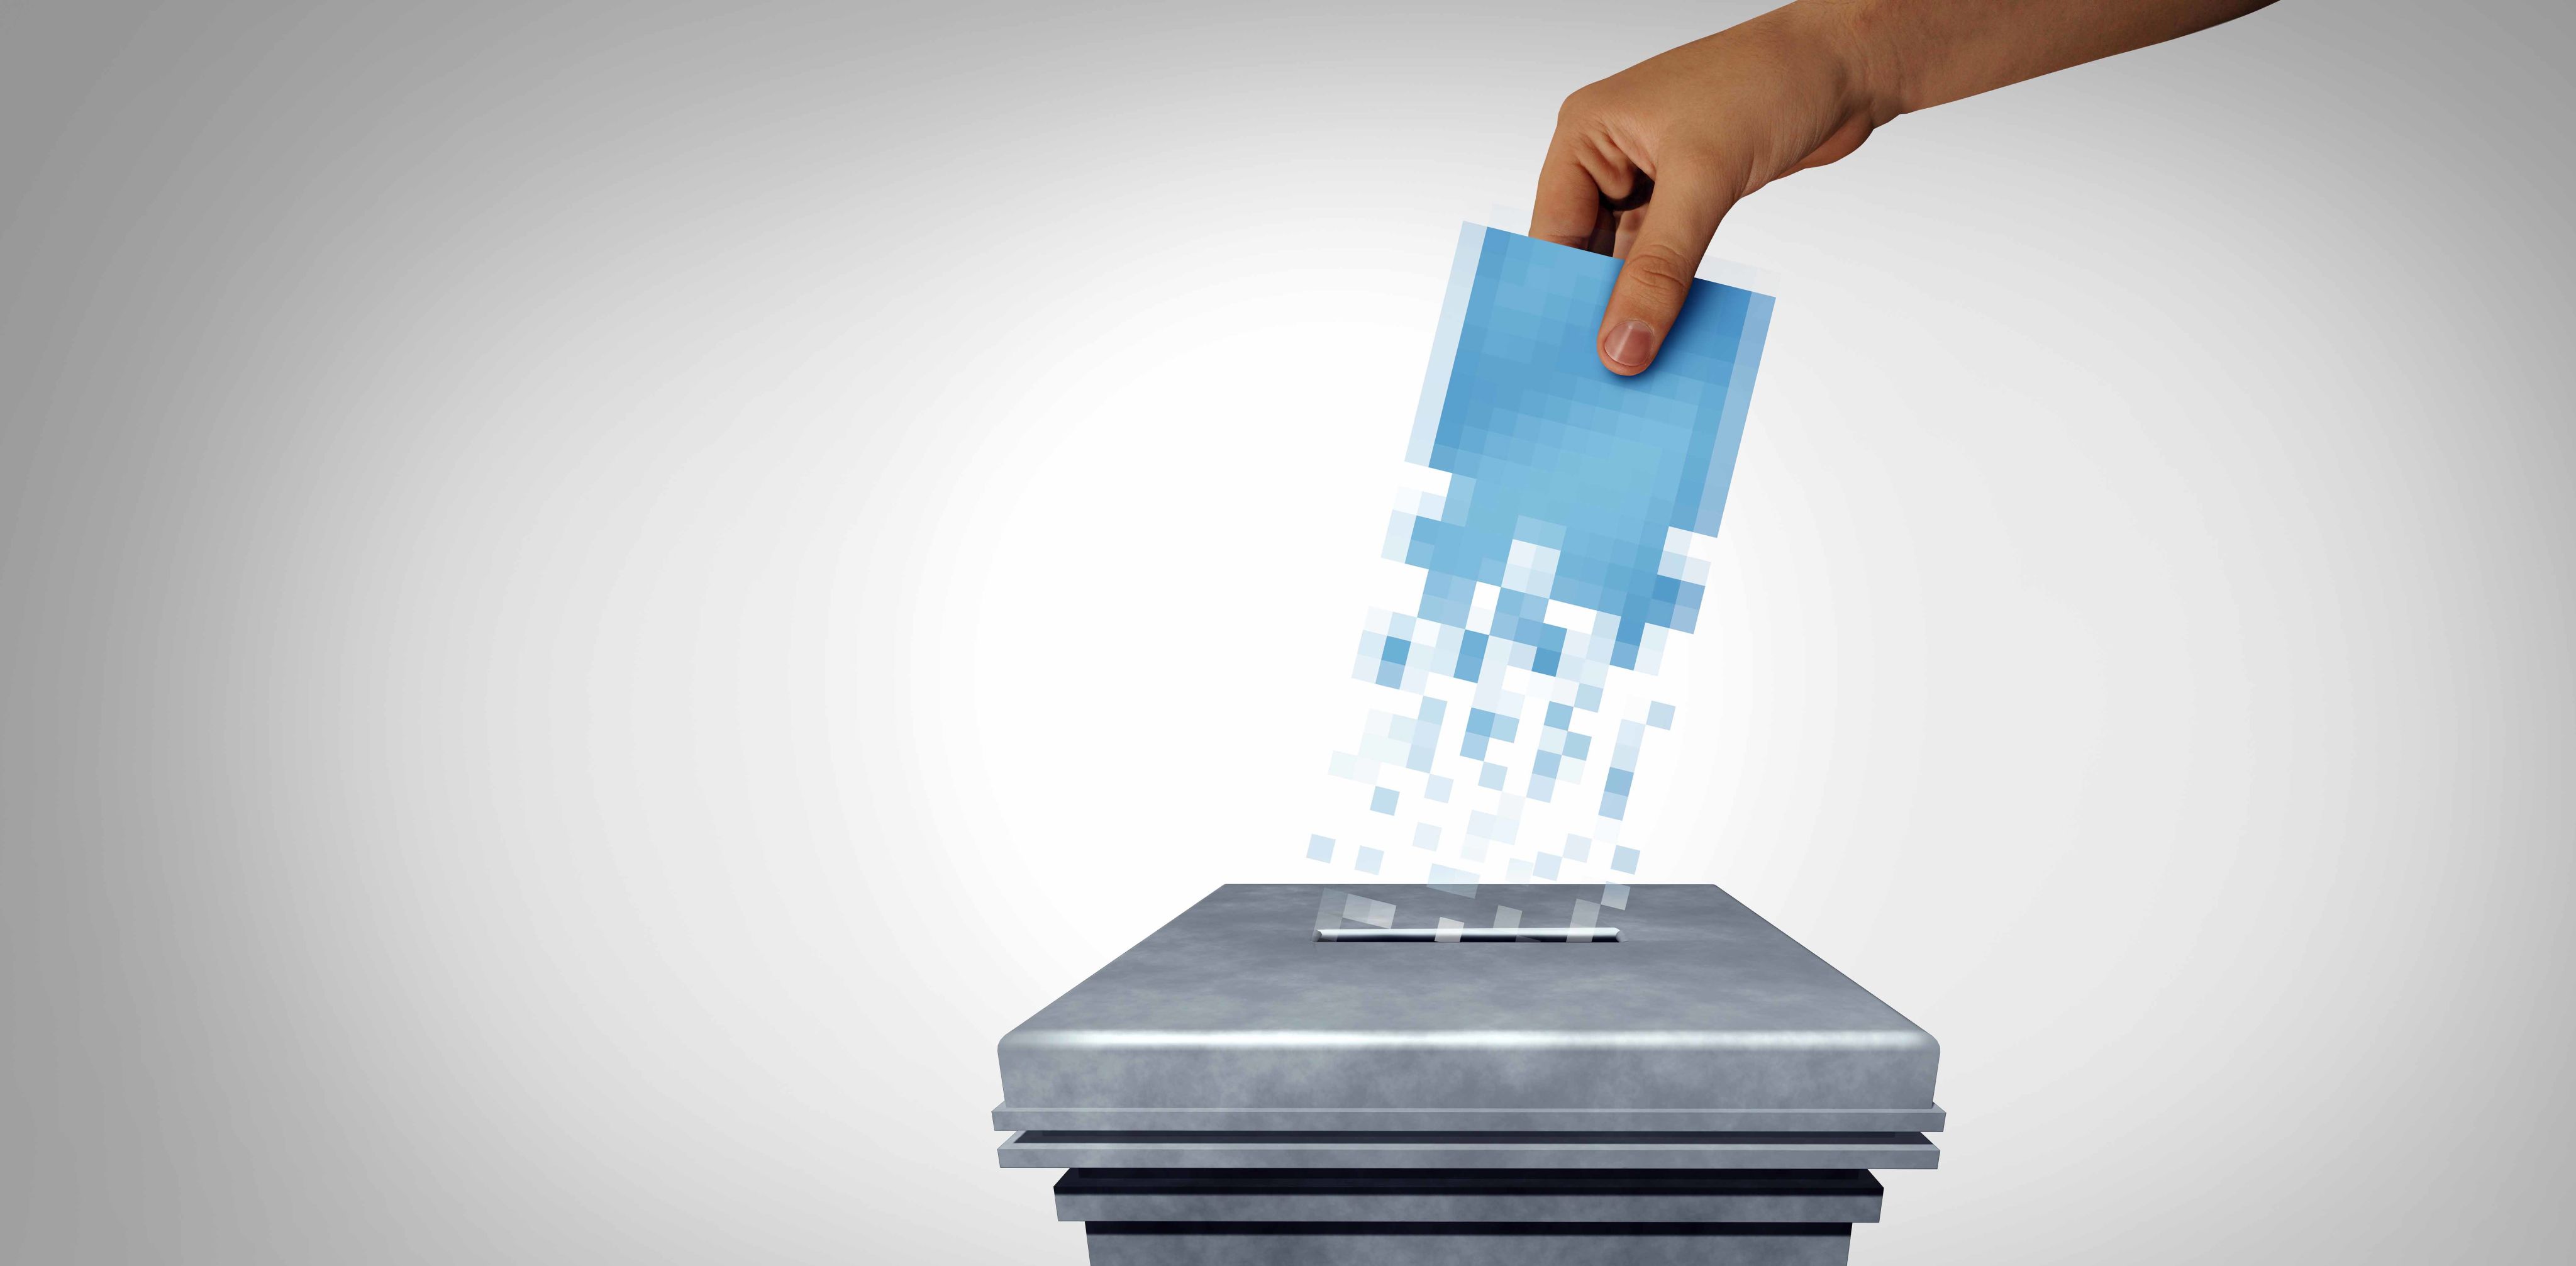 Online voting election concept and internet vote or e-voting web survey with 3D illustration elements. wildpixel via Getty Images